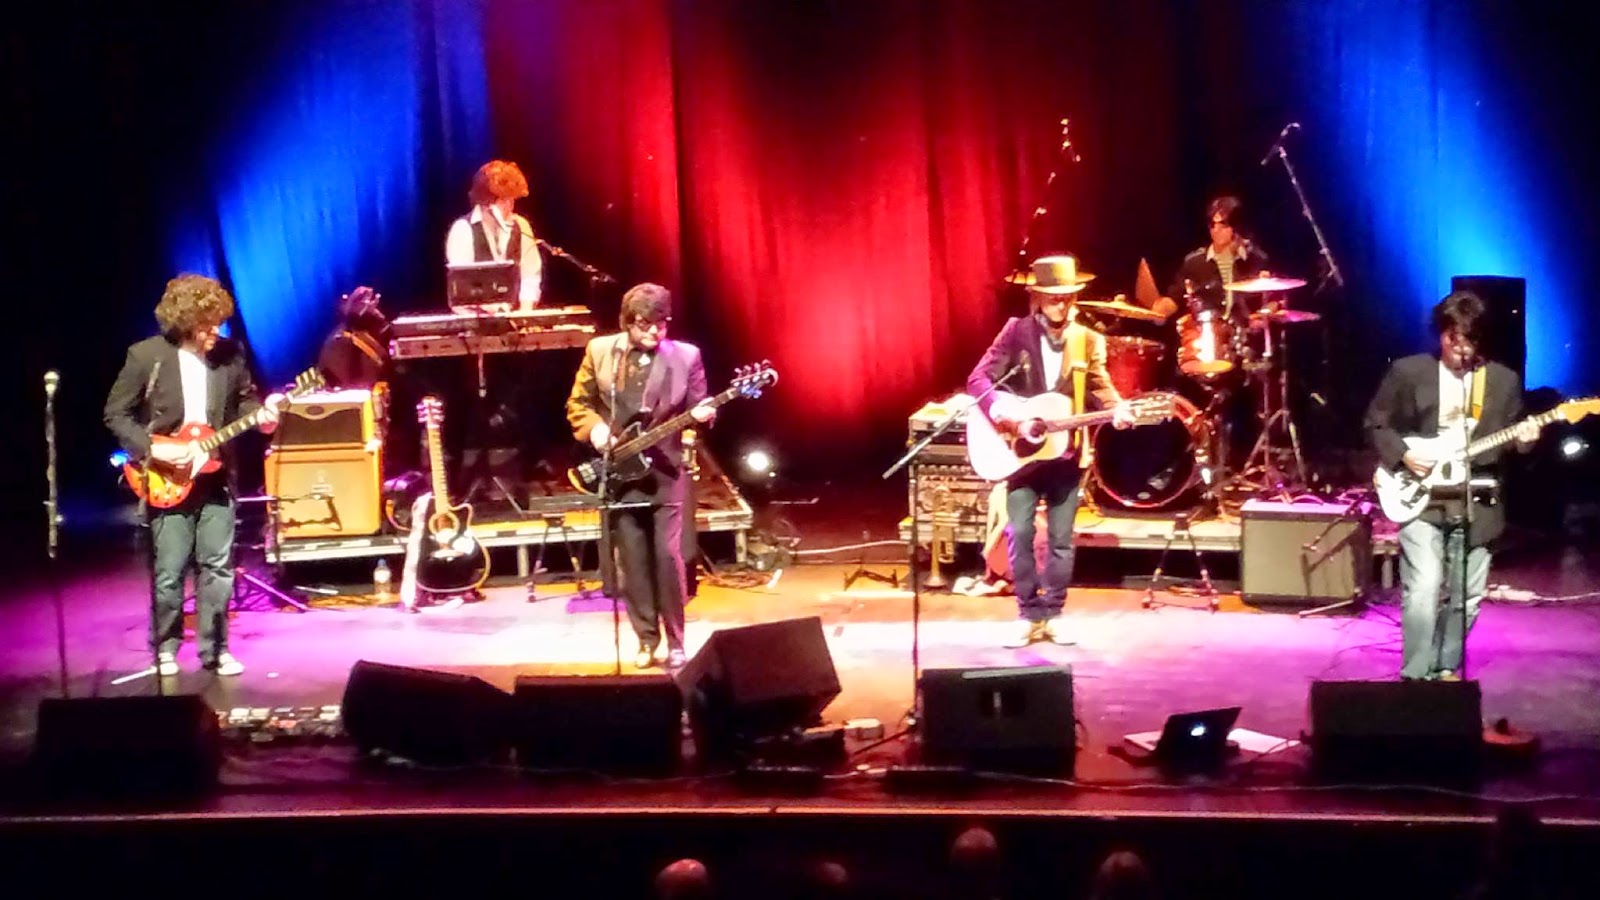 ROY ORBISON & THE TRAVELING WILBURYS TRIBUTE SHOW The Deco